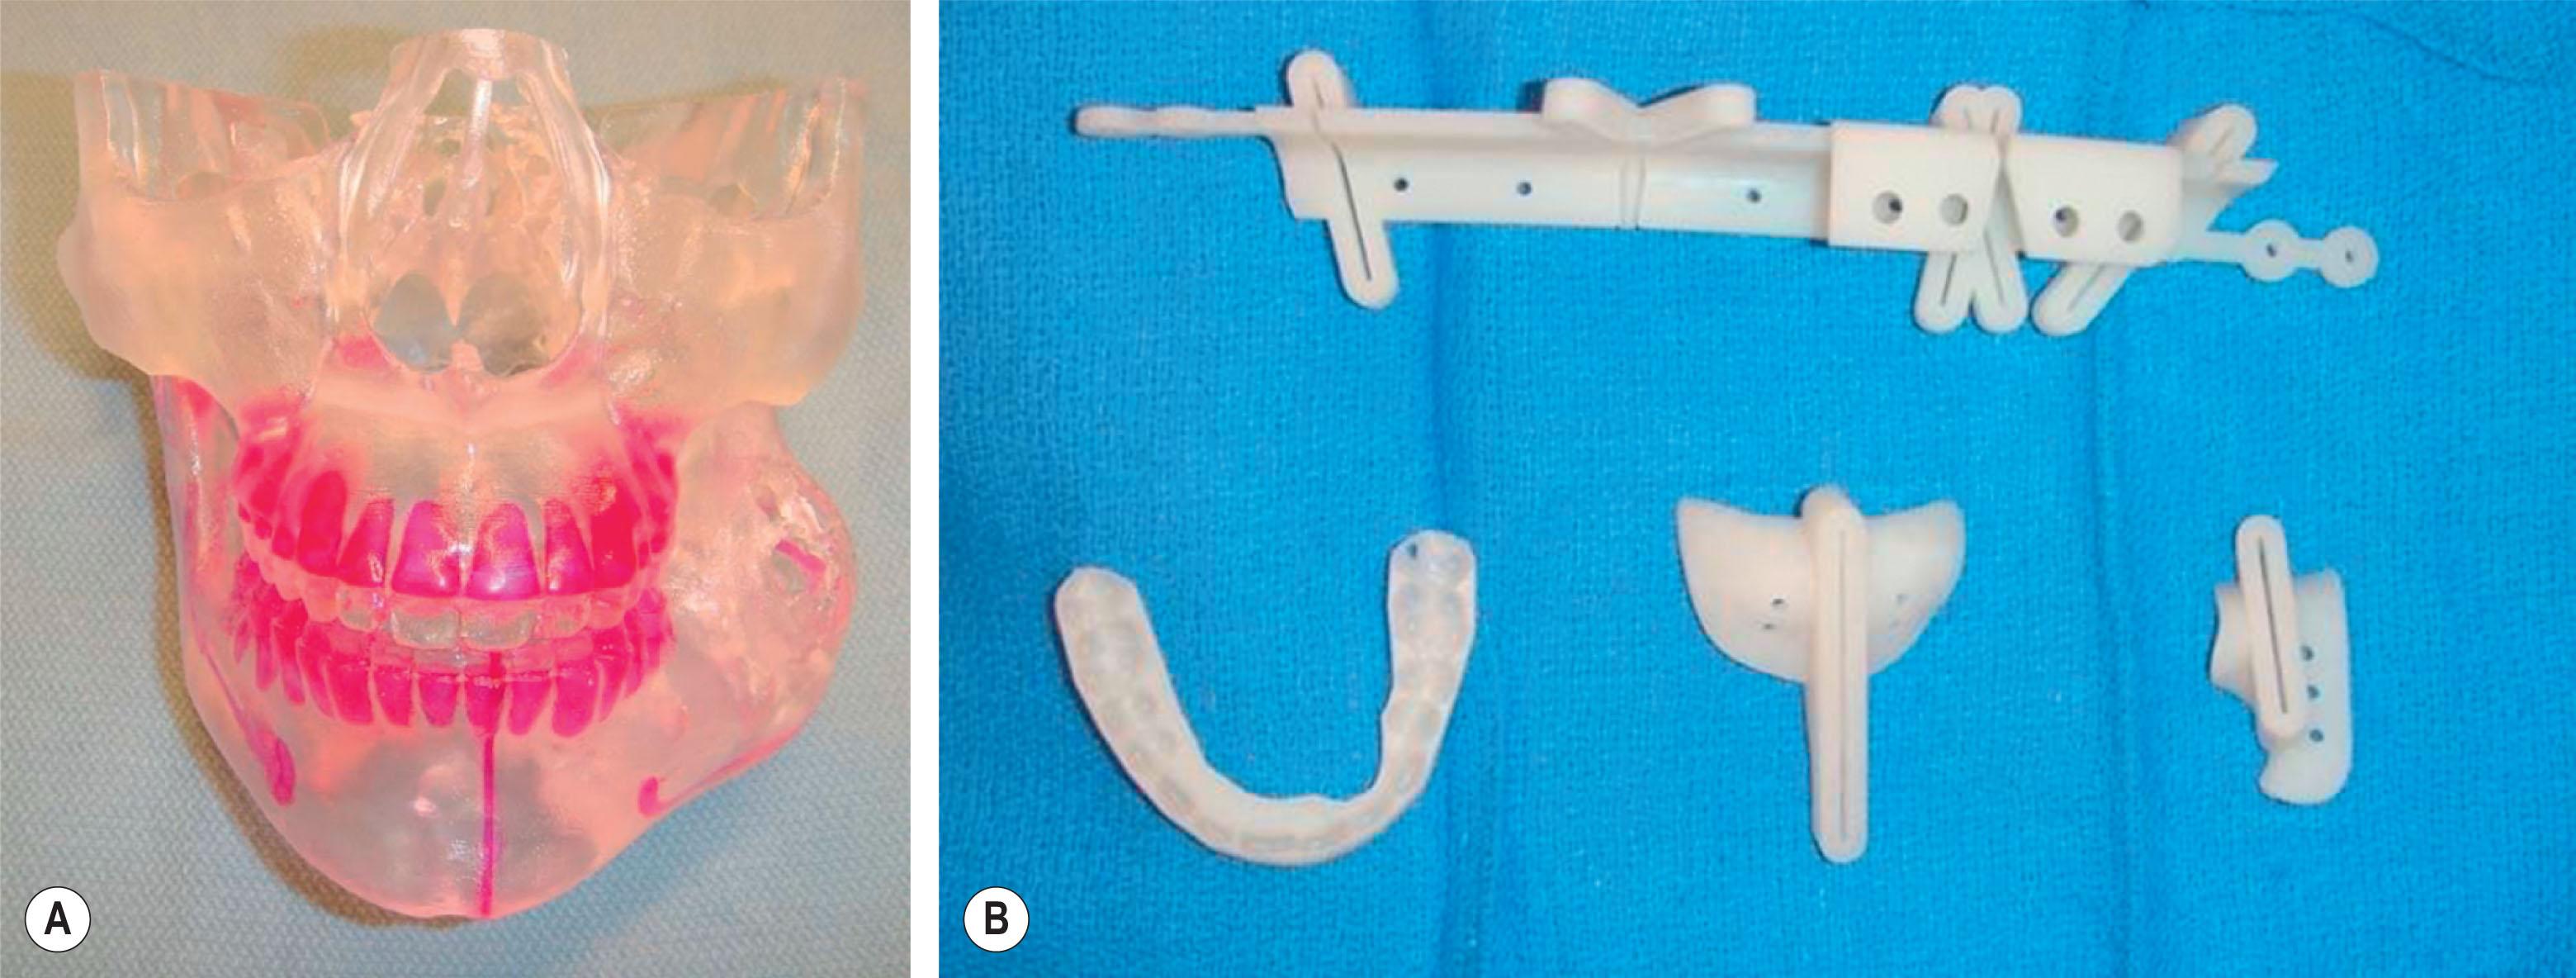 Figure 6.3.1, (A) A stereolithographic model of the skull with the tumor and virtual cuts colored. (B) The cutting guide specific to the patient’s fibula and mandible are noted along with an occlusal splint.